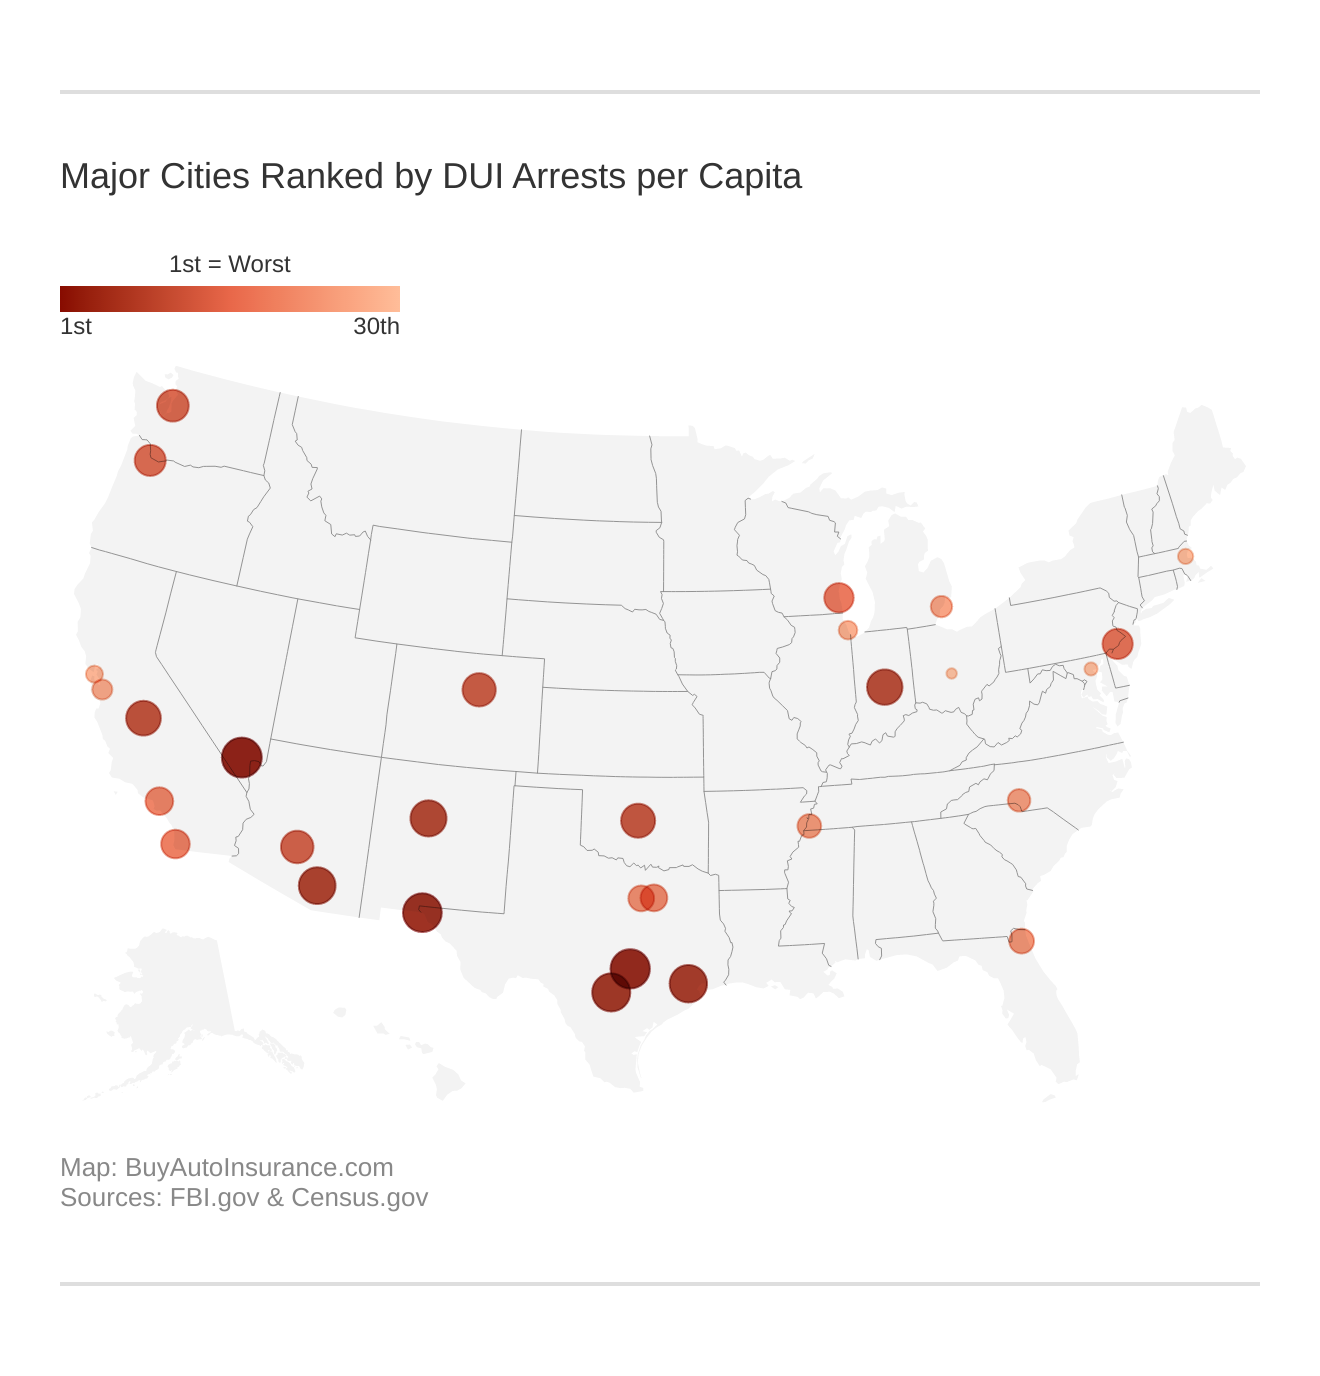 Major Cities Ranked by DUI Arrests per Capita